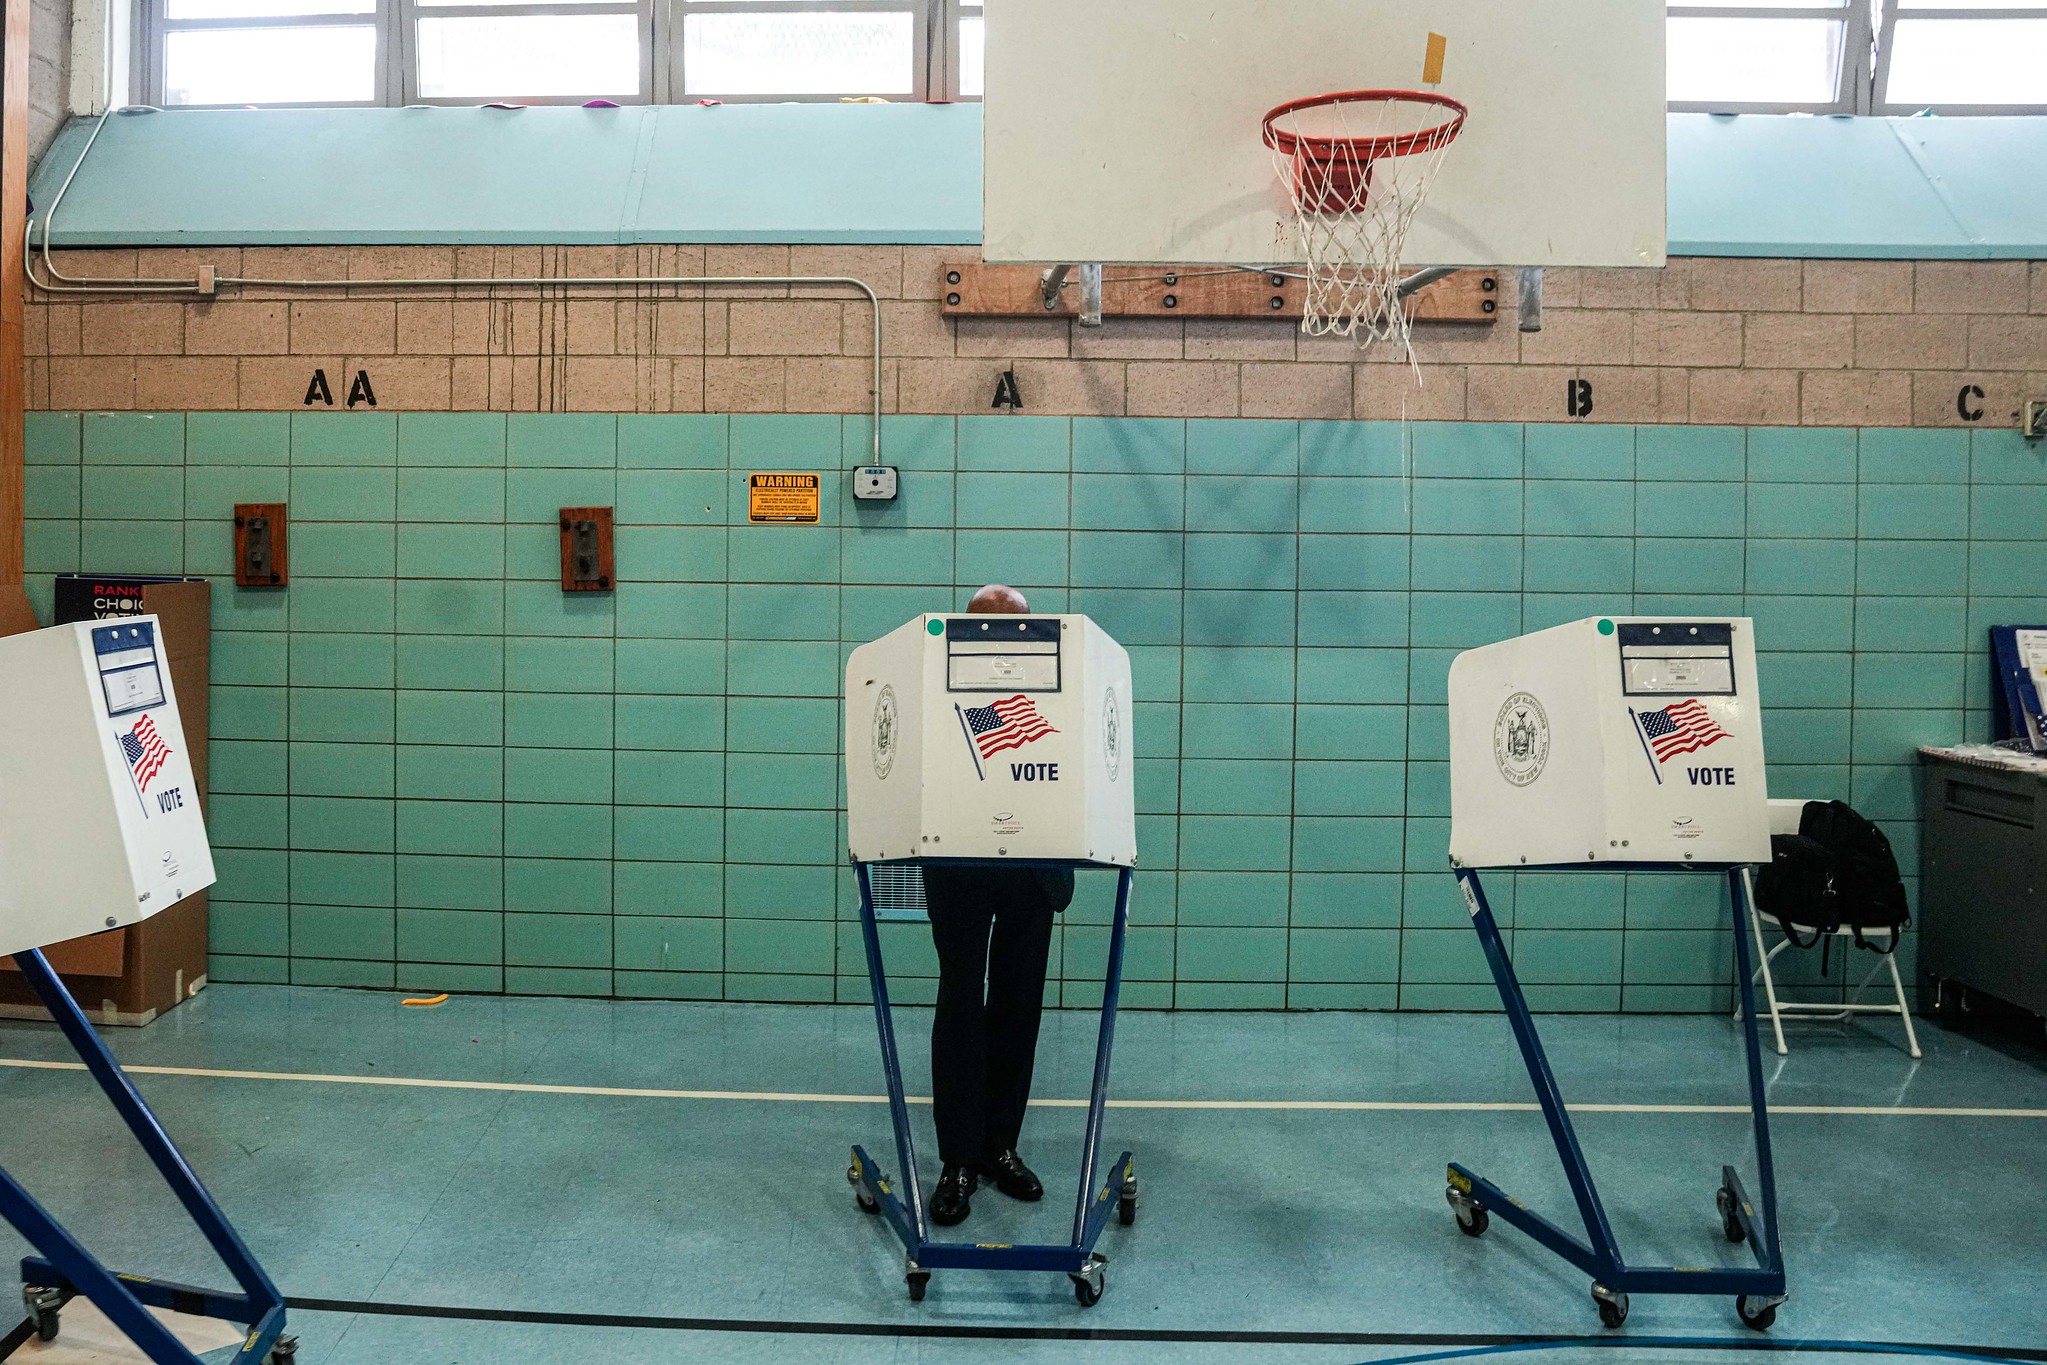 Voting machines in a gymnasium with a teal background and floor